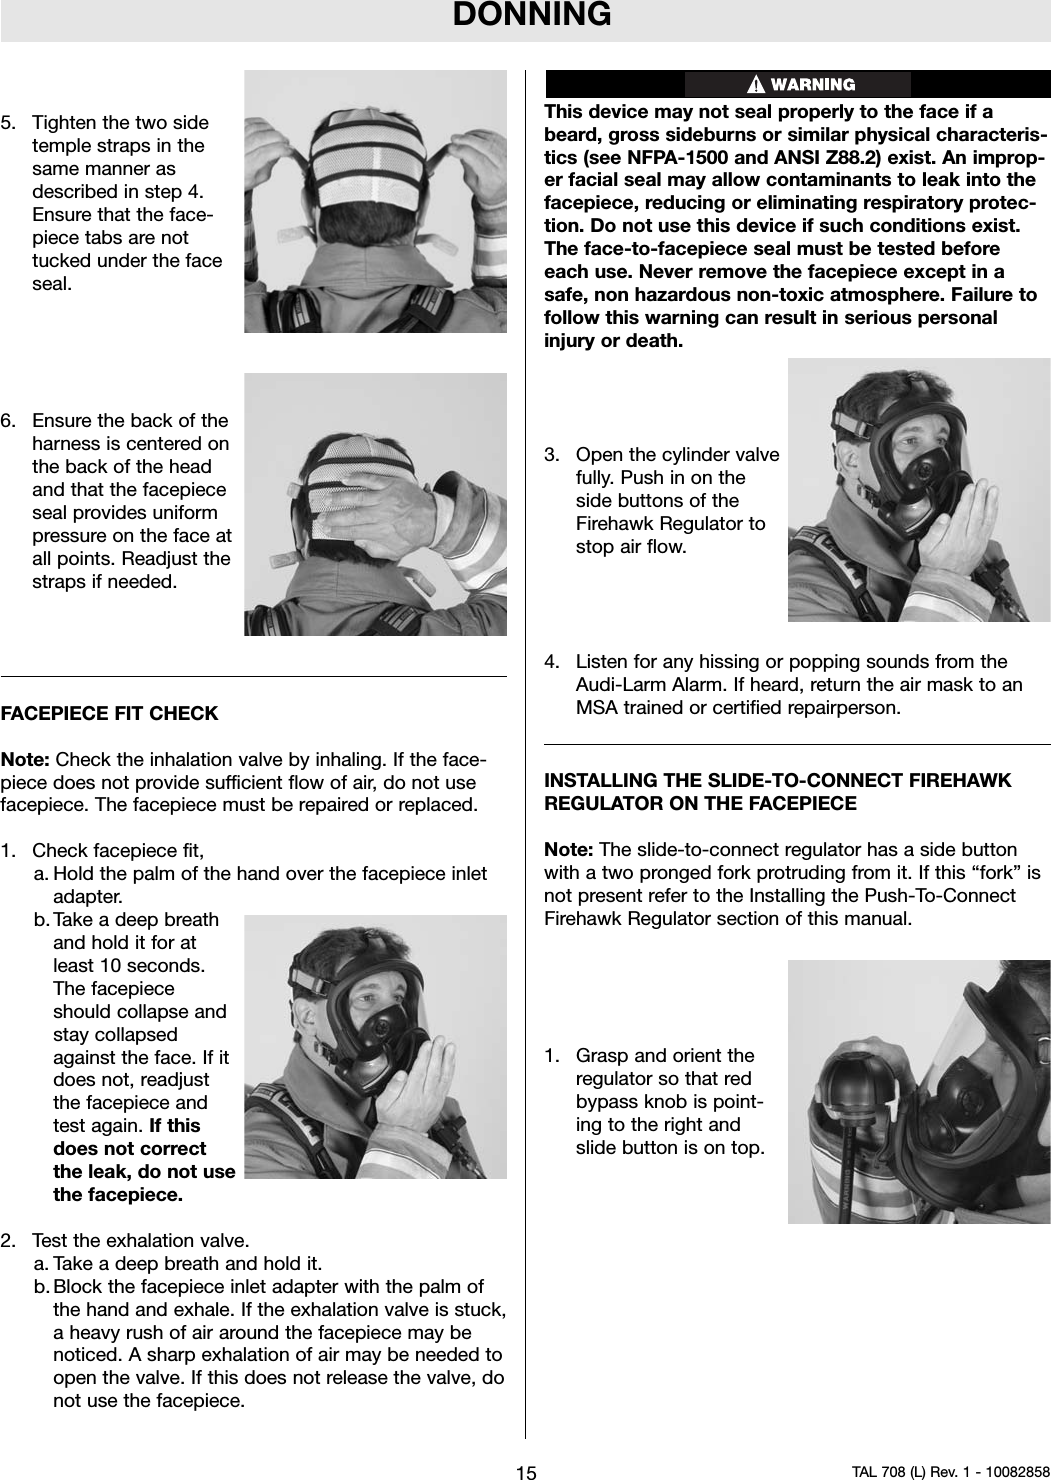 DONNING5. Tighten the two sidetemple straps in thesame manner asdescribed in step 4.Ensure that the face-piece tabs are nottucked under the faceseal.6. Ensure the back of theharness is centered onthe back of the headand that the facepieceseal provides uniformpressure on the face atall points. Readjust thestraps if needed.FACEPIECE FIT CHECKNote: Check the inhalation valve by inhaling. If the face-piece does not provide sufficient flow of air, do not usefacepiece. The facepiece must be repaired or replaced.1. Check facepiece fit,a. Hold the palm of the hand over the facepiece inletadapter.b. Take a deep breathand hold it for atleast 10 seconds.The facepieceshould collapse andstay collapsedagainst the face. If itdoes not, readjustthe facepiece andtest again. If thisdoes not correctthe leak, do not usethe facepiece.2. Test the exhalation valve.a. Take a deep breath and hold it.b. Block the facepiece inlet adapter with the palm ofthe hand and exhale. If the exhalation valve is stuck,a heavy rush of air around the facepiece may benoticed. A sharp exhalation of air may be needed toopen the valve. If this does not release the valve, donot use the facepiece.This device may not seal properly to the face if abeard, gross sideburns or similar physical characteris-tics (see NFPA-1500 and ANSI Z88.2) exist. An improp-er facial seal may allow contaminants to leak into thefacepiece, reducing or eliminating respiratory protec-tion. Do not use this device if such conditions exist.The face-to-facepiece seal must be tested beforeeach use. Never remove the facepiece except in asafe, non hazardous non-toxic atmosphere. Failure tofollow this warning can result in serious personalinjury or death.3. Open the cylinder valvefully. Push in on theside buttons of theFirehawk Regulator tostop air flow.4. Listen for any hissing or popping sounds from theAudi-Larm Alarm. If heard, return the air mask to anMSA trained or certified repairperson.INSTALLING THE SLIDE-TO-CONNECT FIREHAWKREGULATOR ON THE FACEPIECENote: The slide-to-connect regulator has a side buttonwith a two pronged fork protruding from it. If this “fork” isnot present refer to the Installing the Push-To-ConnectFirehawk Regulator section of this manual.1. Grasp and orient theregulator so that redbypass knob is point-ing to the right andslide button is on top.15 TAL 708 (L) Rev. 1 - 10082858